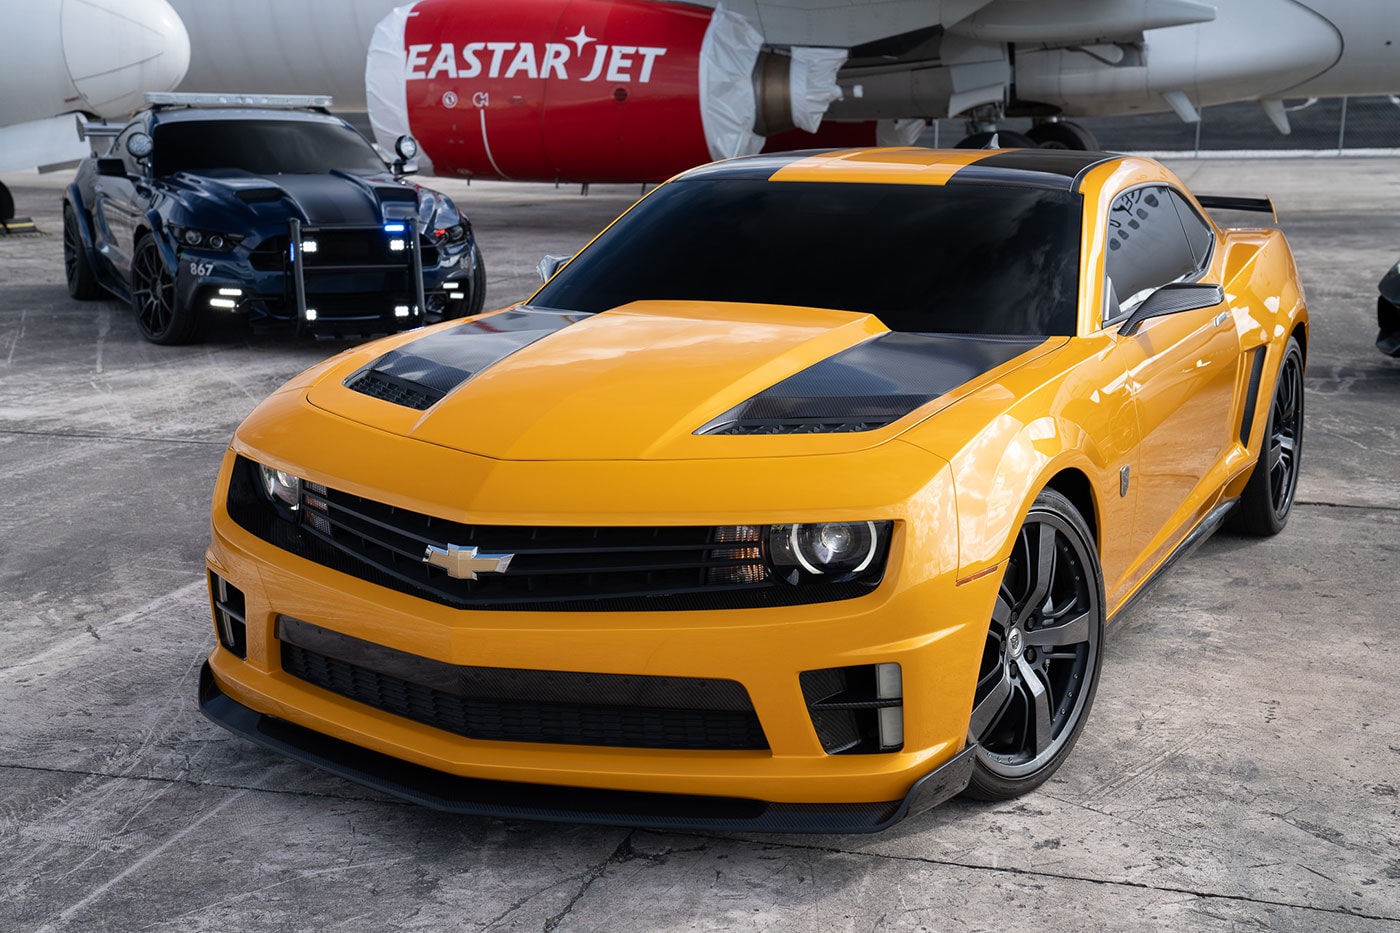 Transformers Movie Cars Sale $2 Million USD Collection Release Buy Price Info Bumblebee Barricade Chevrolet Camaro Ford Mustang Lamborghini Aventador Mercedes-Benz SLS AMG